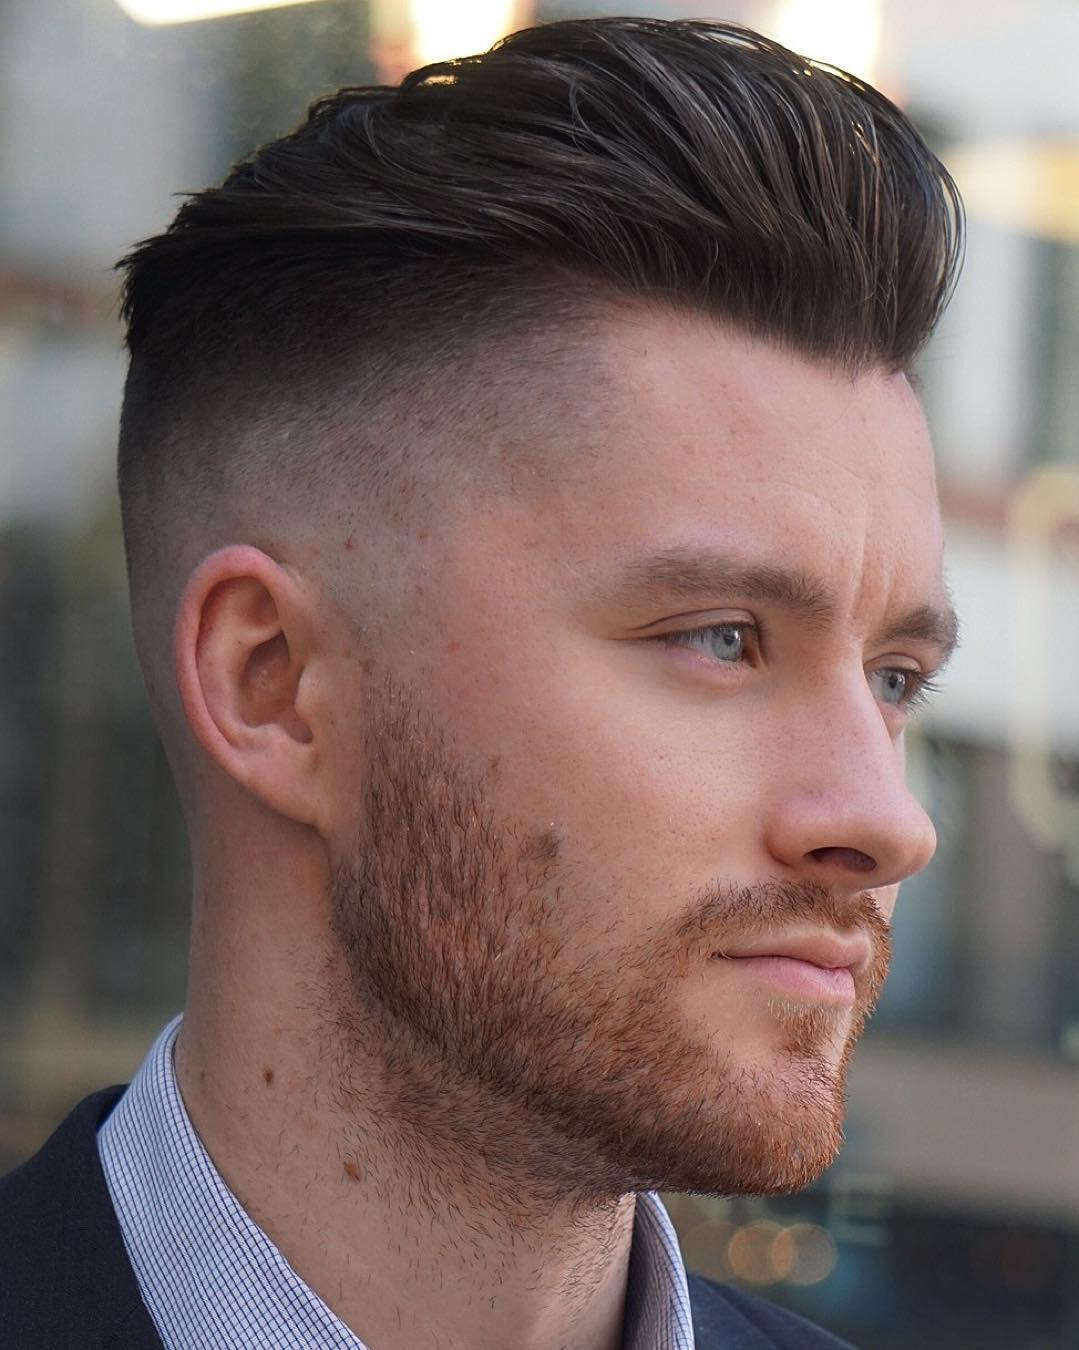 Undercut Hairstyles For Men
 50 Stylish Undercut Hairstyle Variations to copy in 2019 A plete Guide